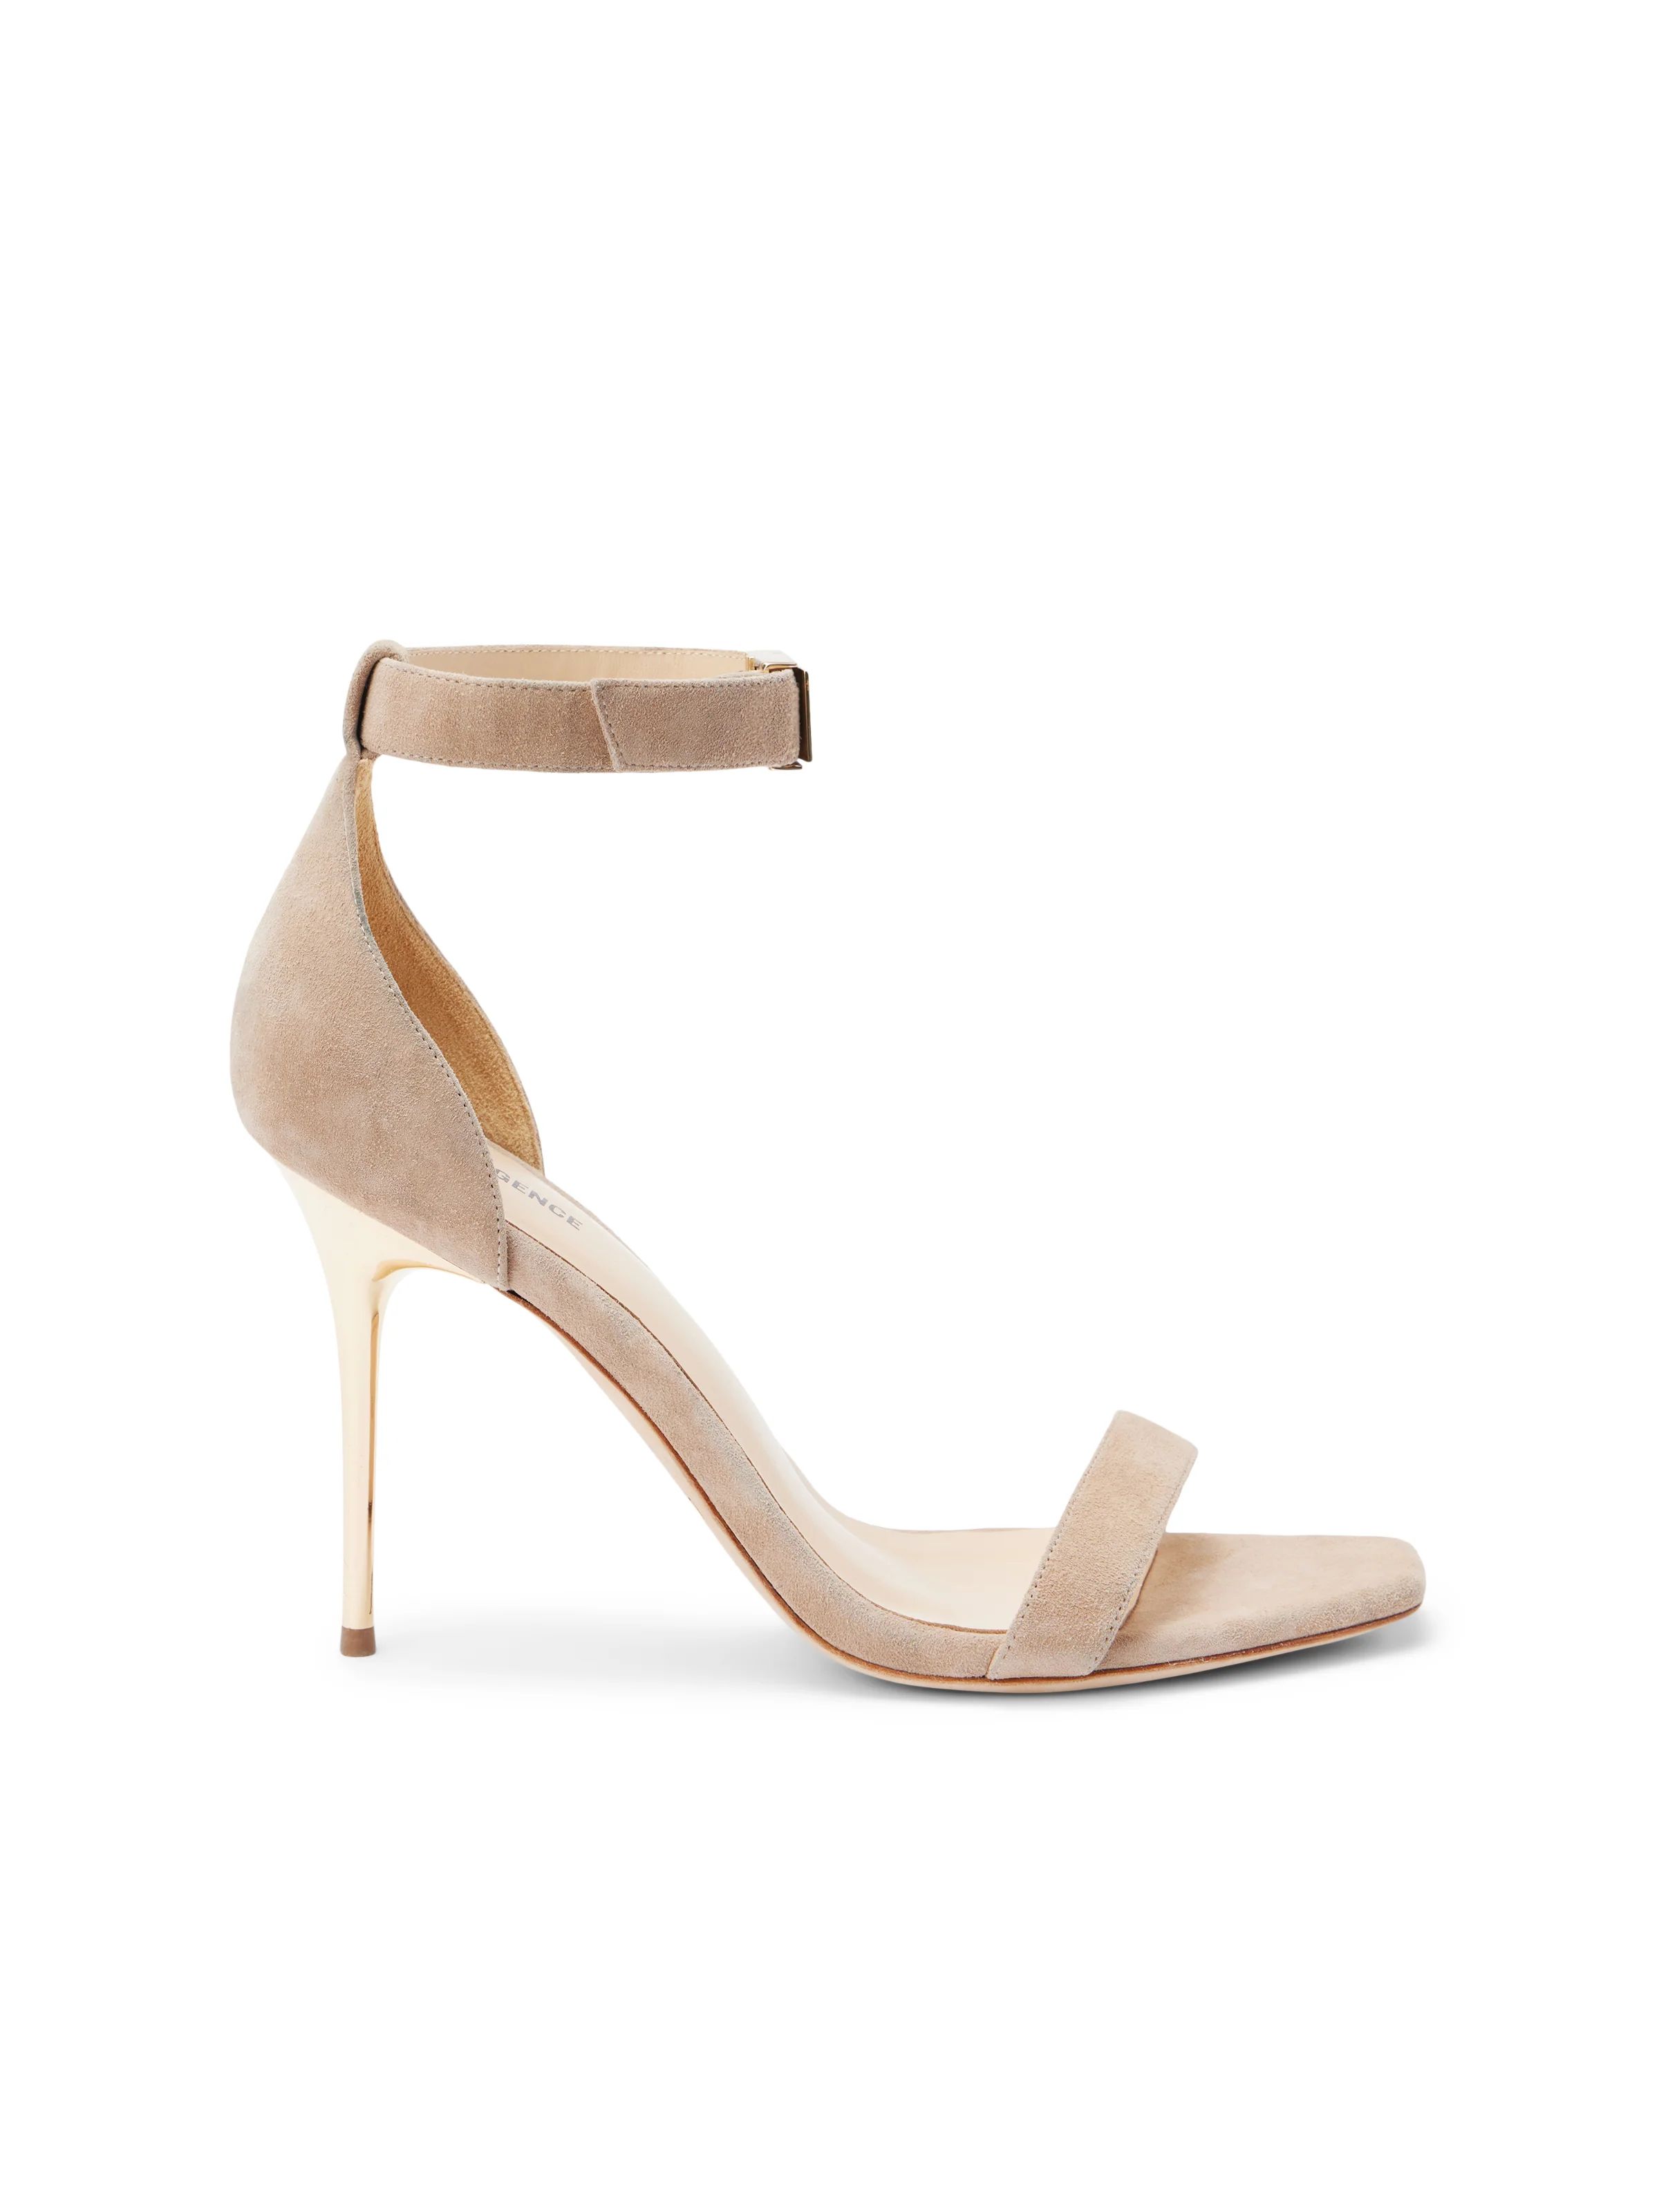 L'AGENCE Thea Sandal in Macaroon Suede | L'Agence